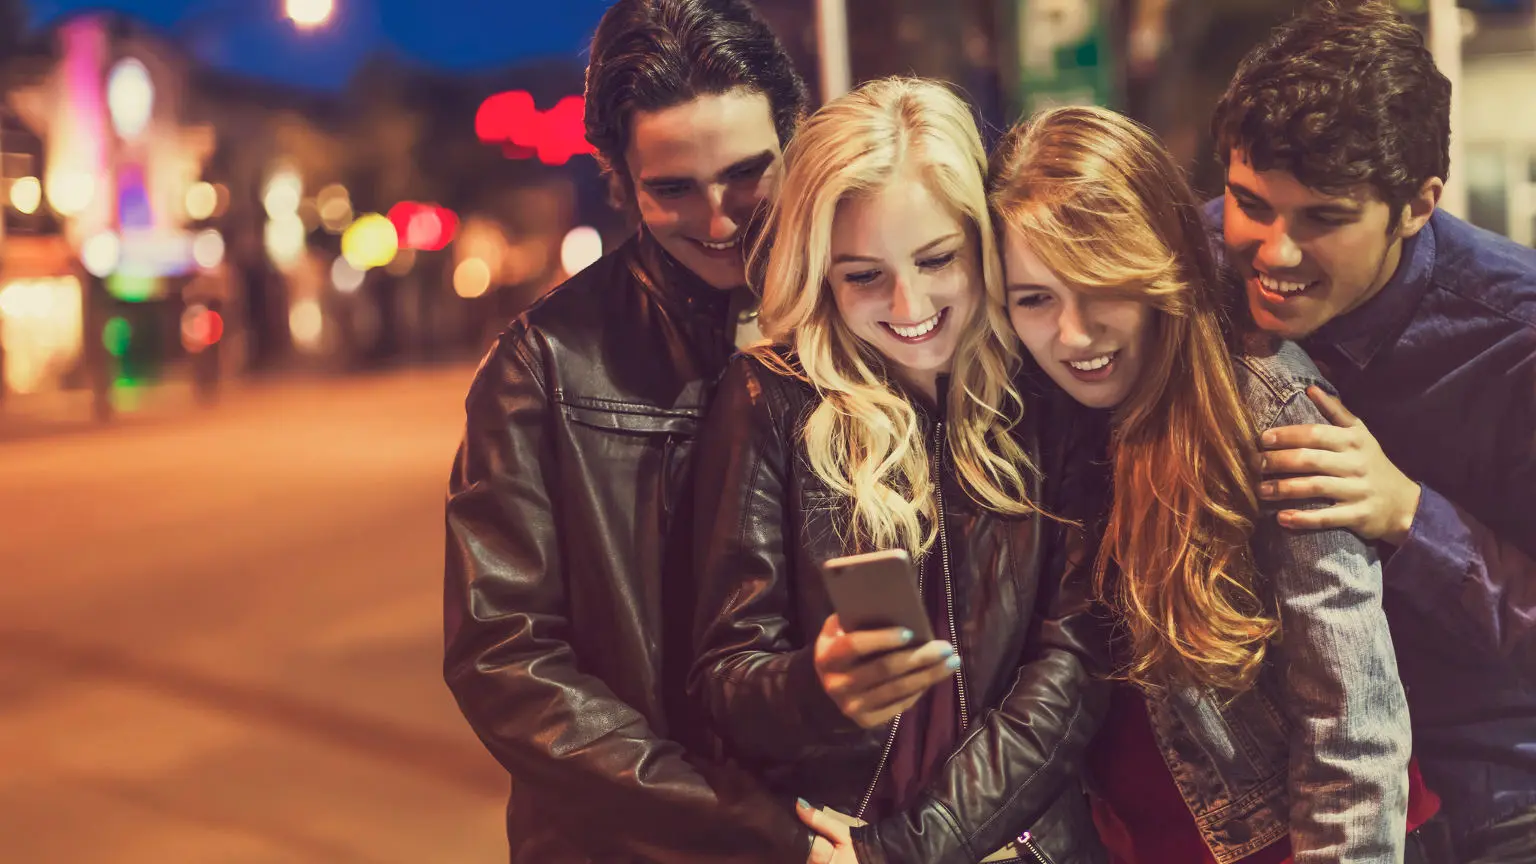 Group smiling and looking at phone